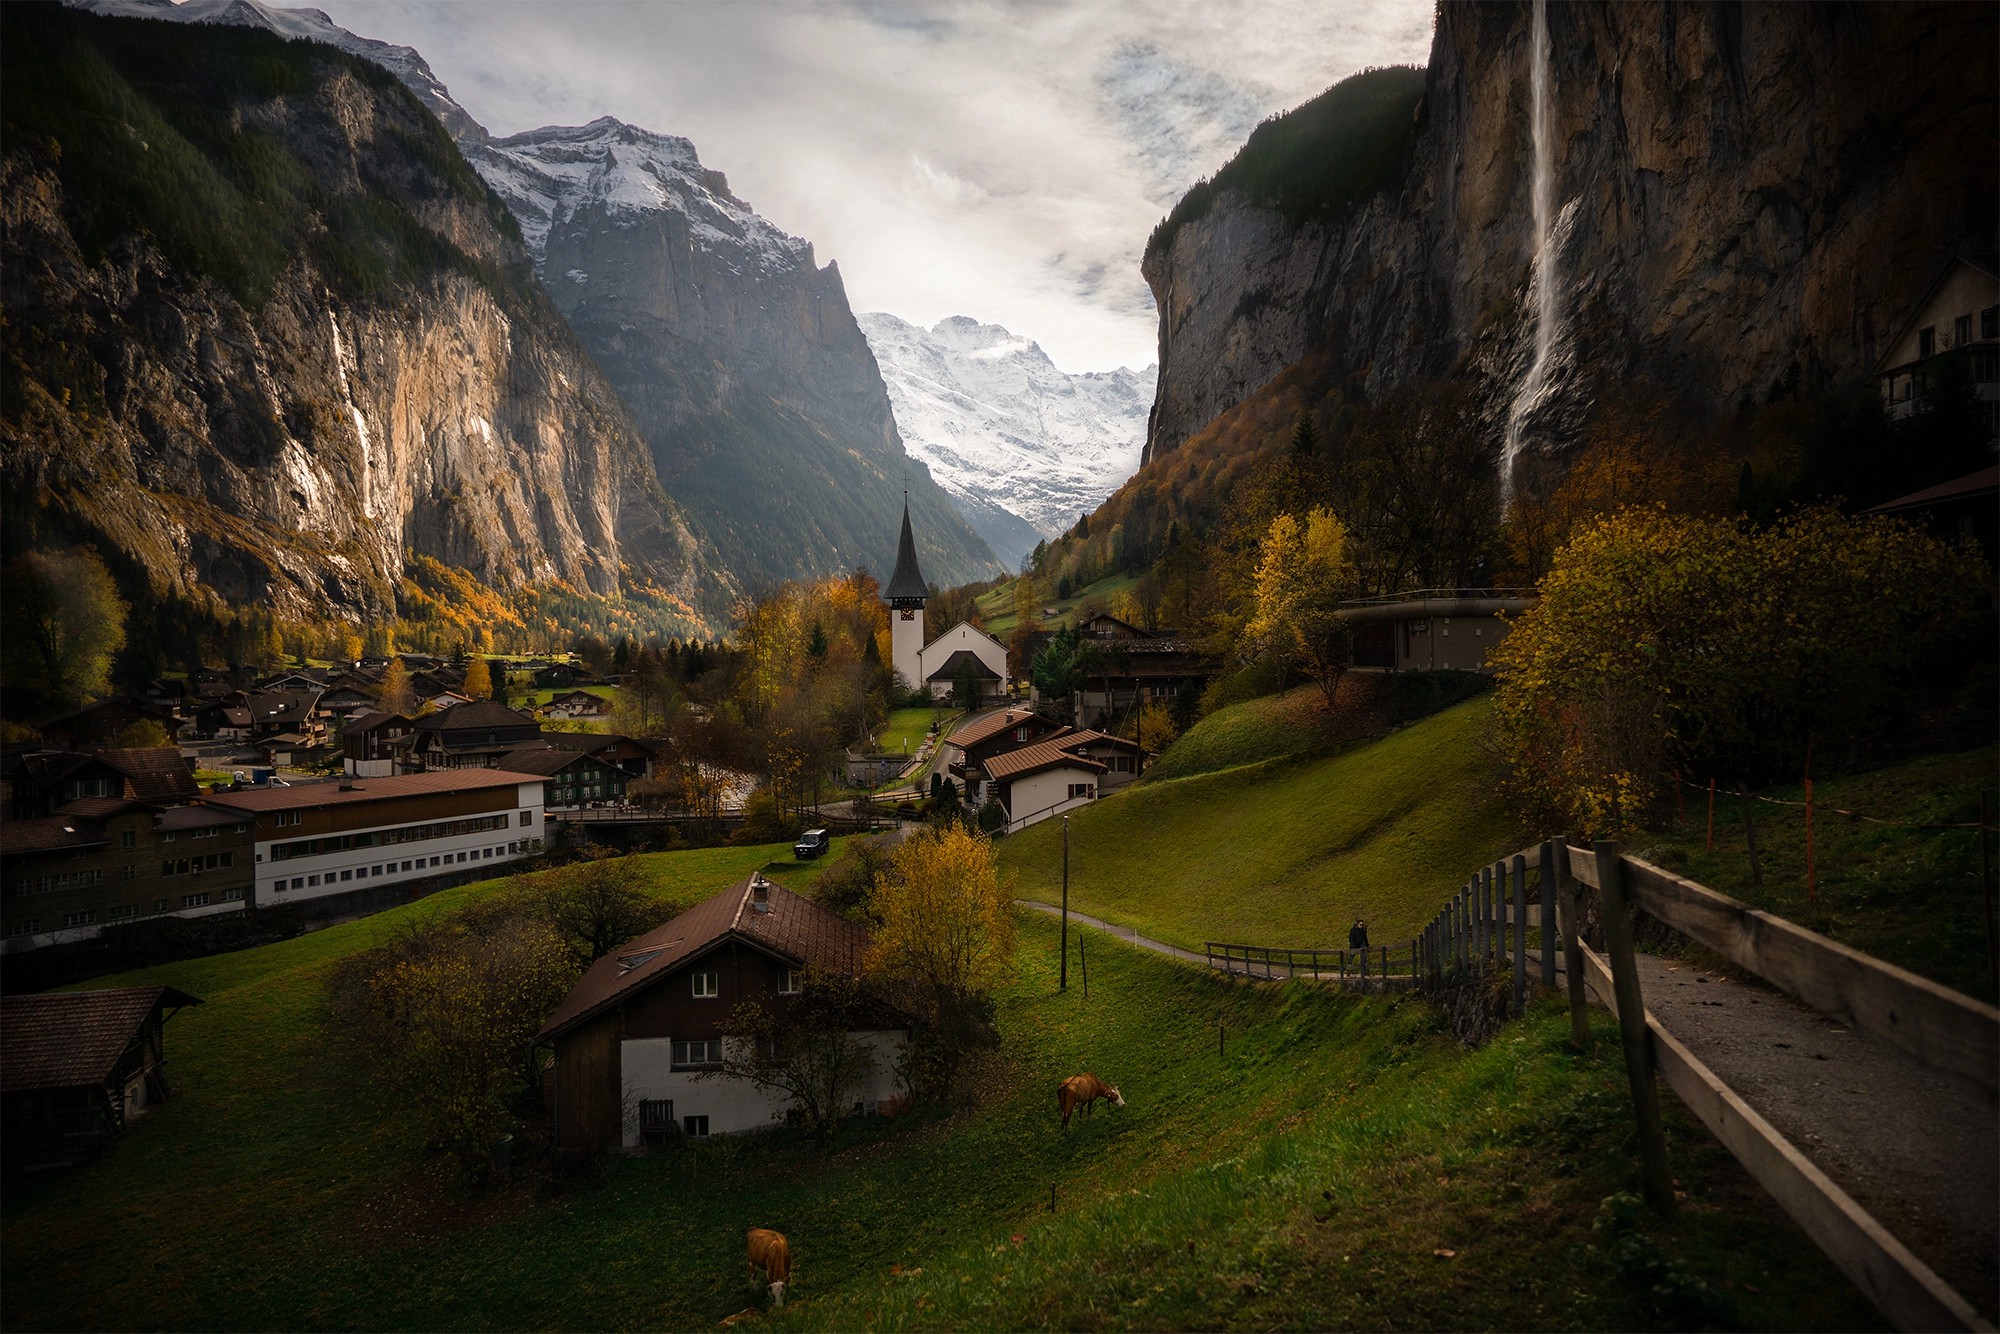 General 2000x1334 Switzerland landscape nature mountains Alps cow snow valley clouds house church path Andrey Brandis photography town 500px